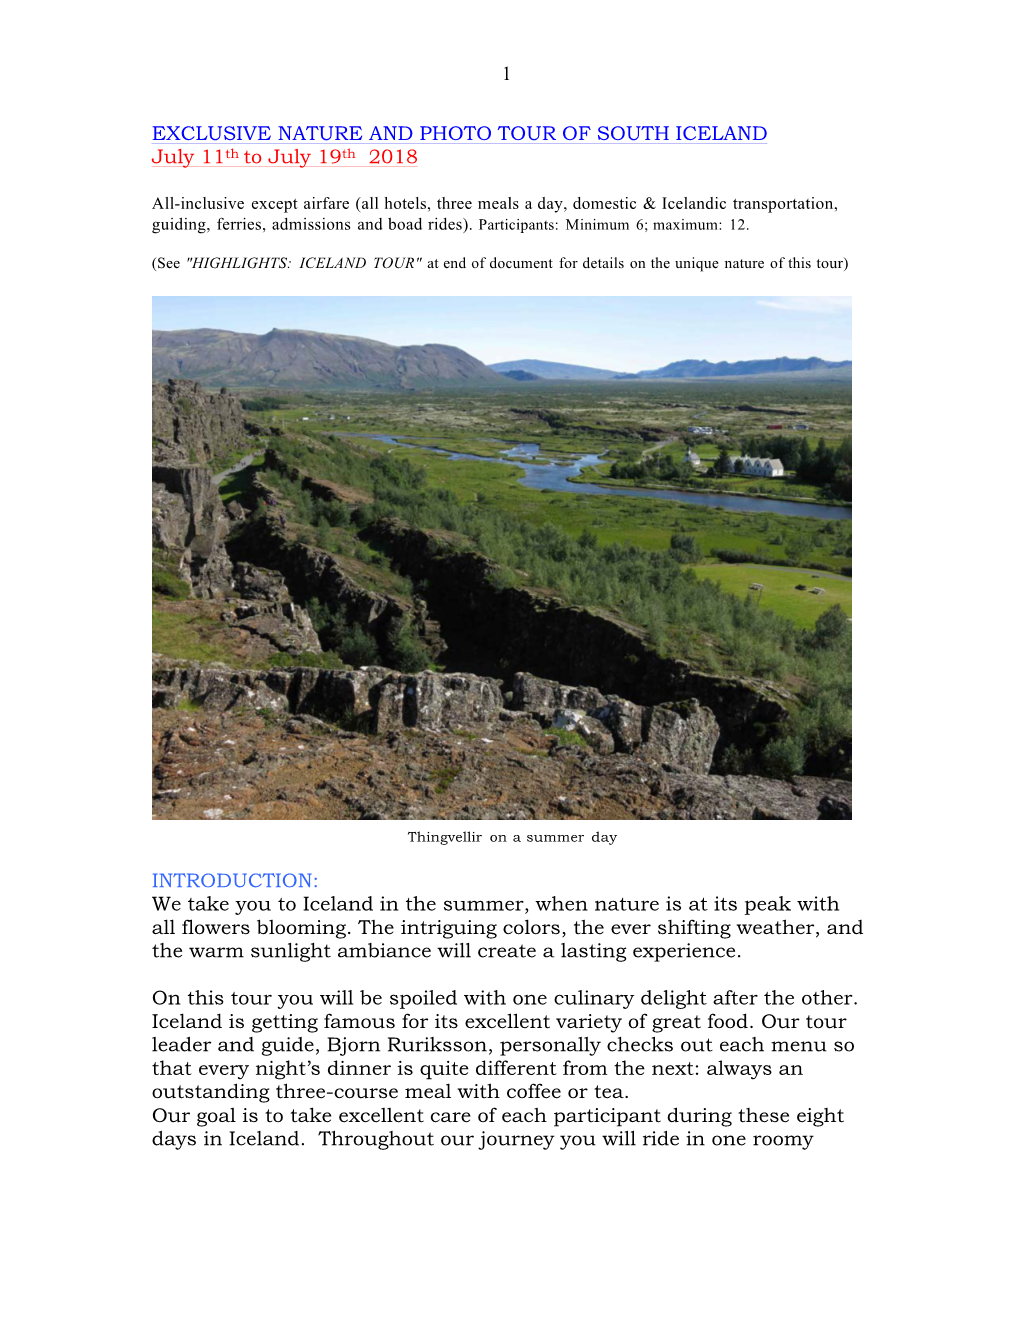 1 EXCLUSIVE NATURE and PHOTO TOUR of SOUTH ICELAND July